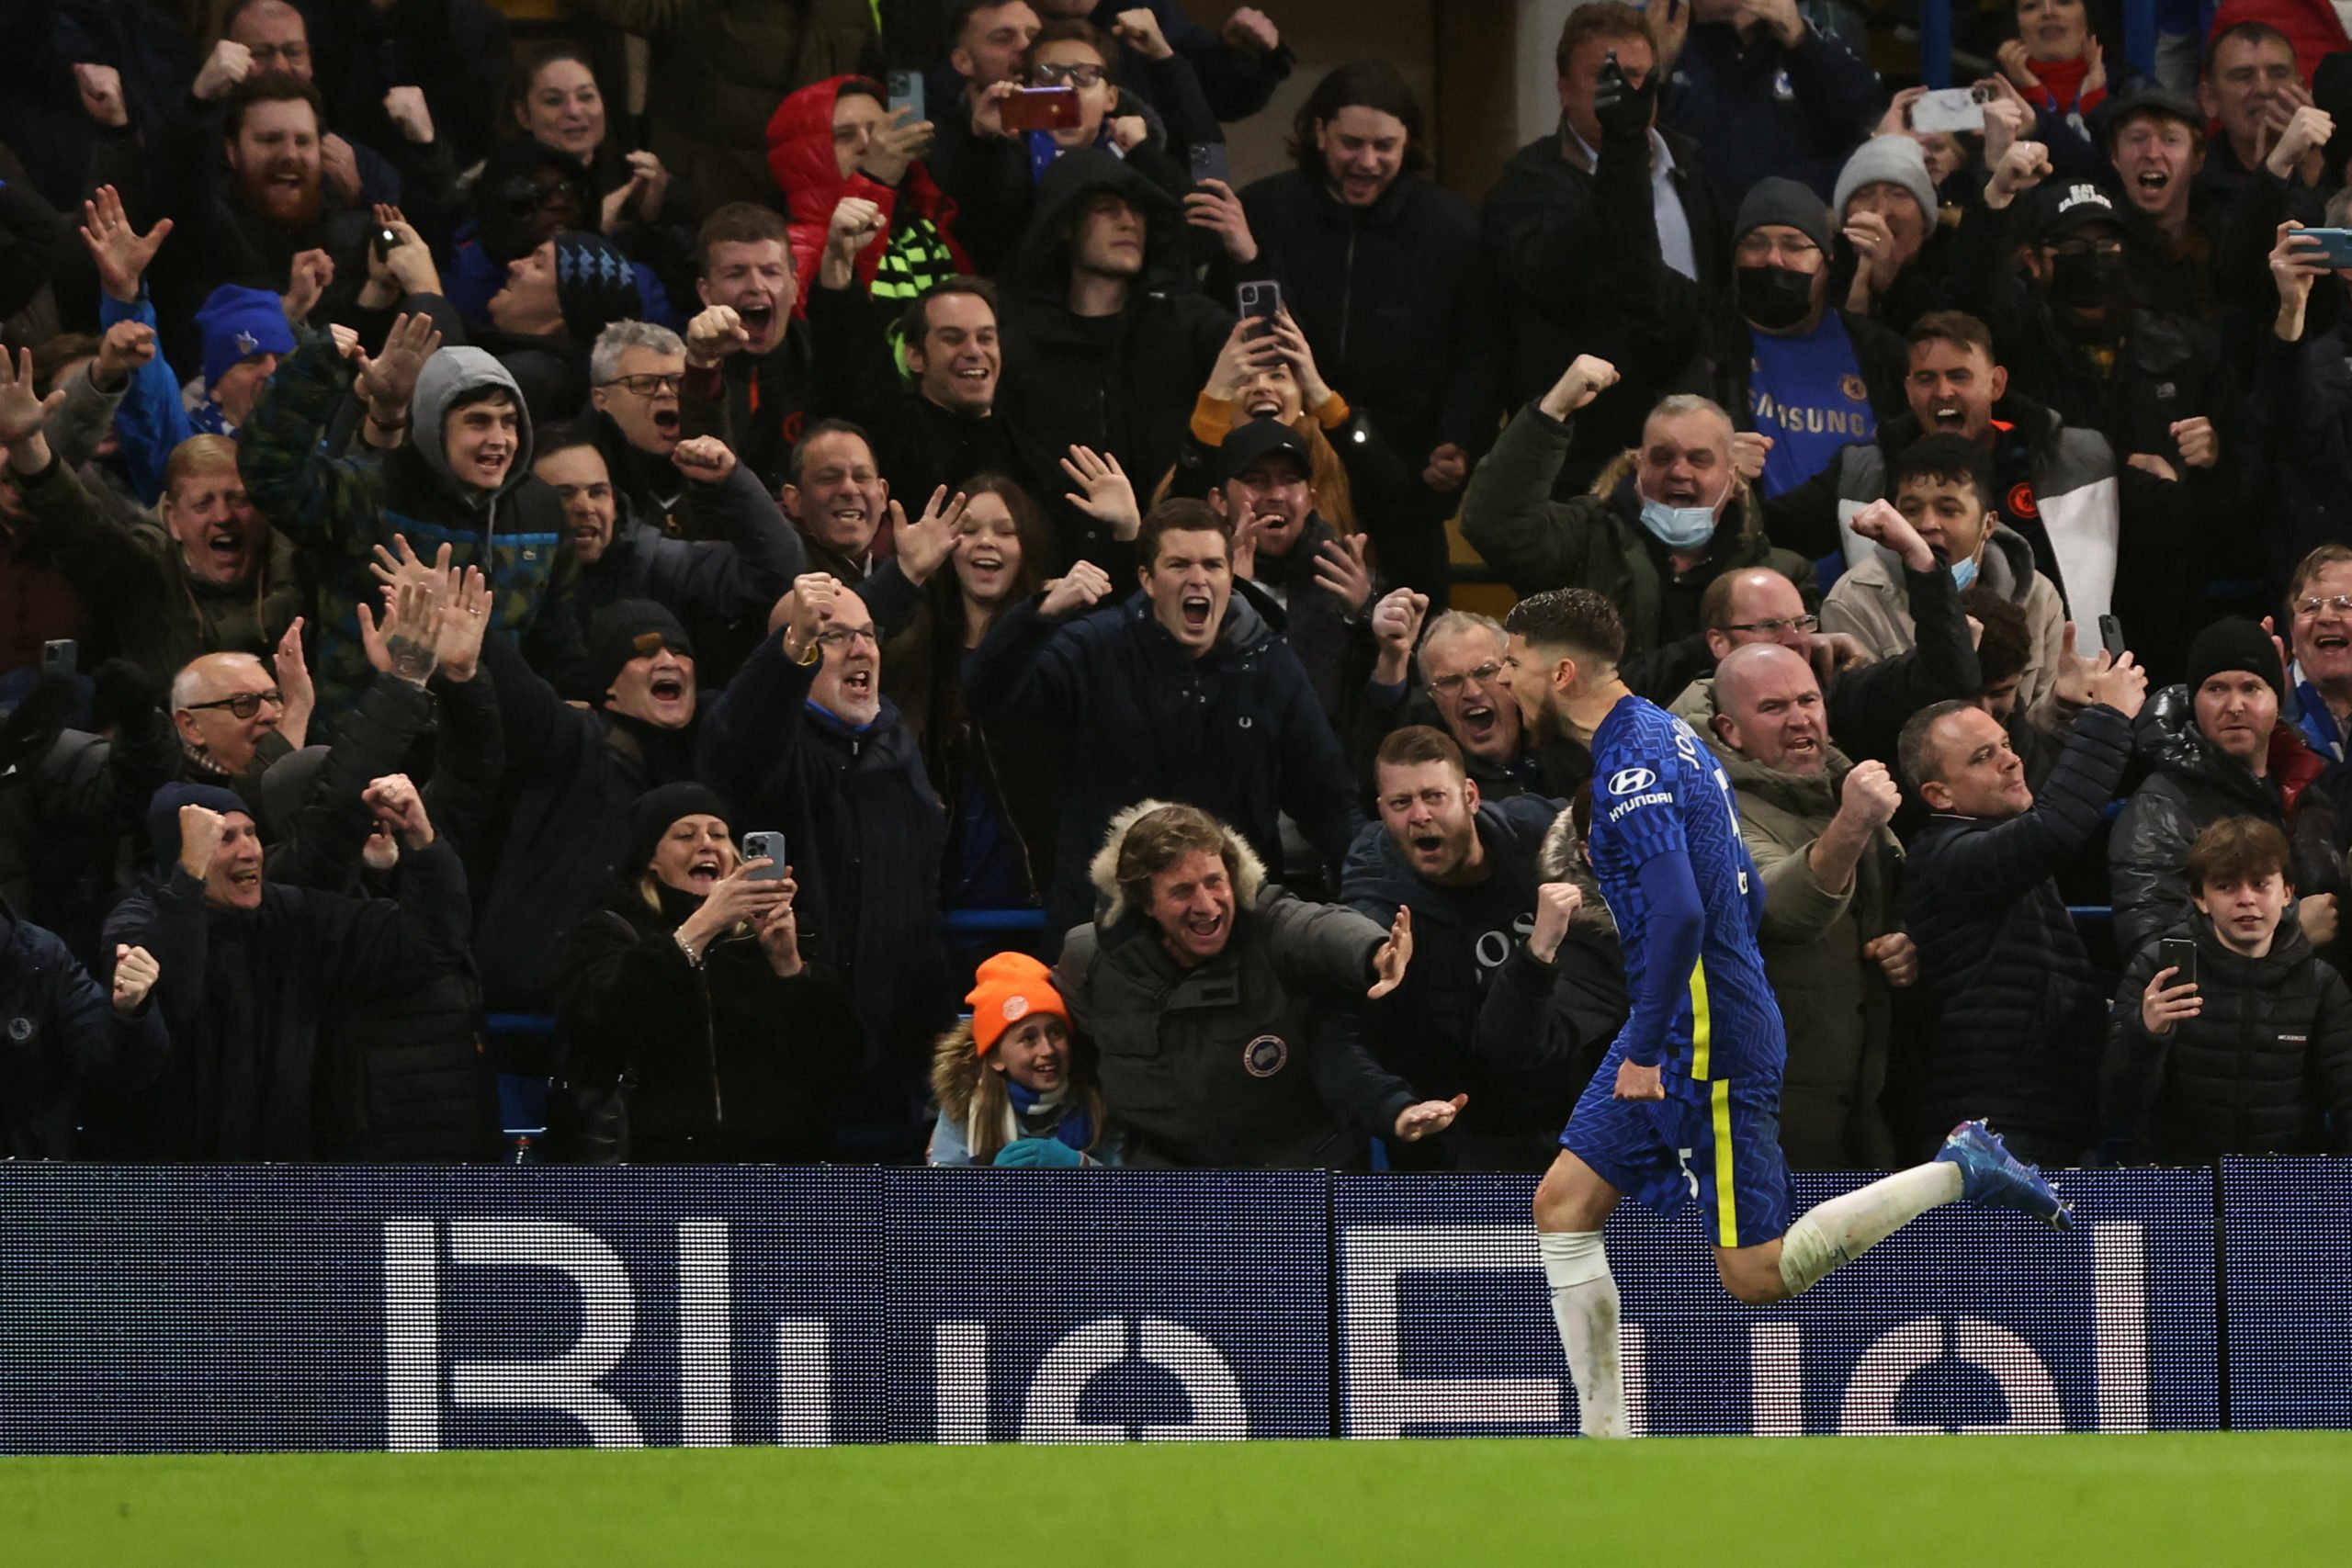 'Better than anyone else': Pat Nevin raves about £50m Chelsea star after weekend display